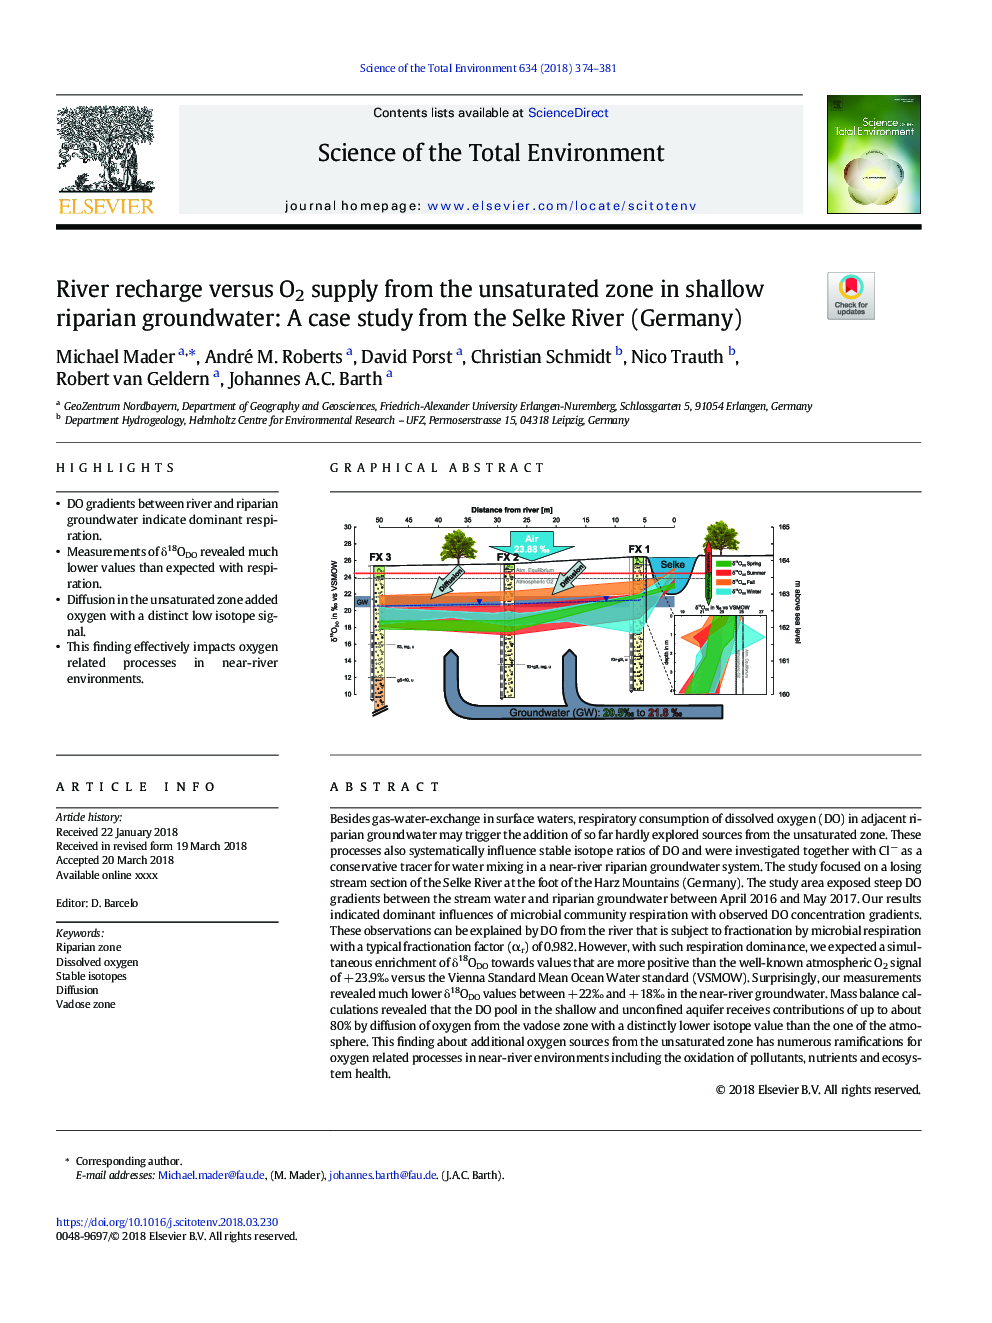 River recharge versus O2 supply from the unsaturated zone in shallow riparian groundwater: A case study from the Selke River (Germany)